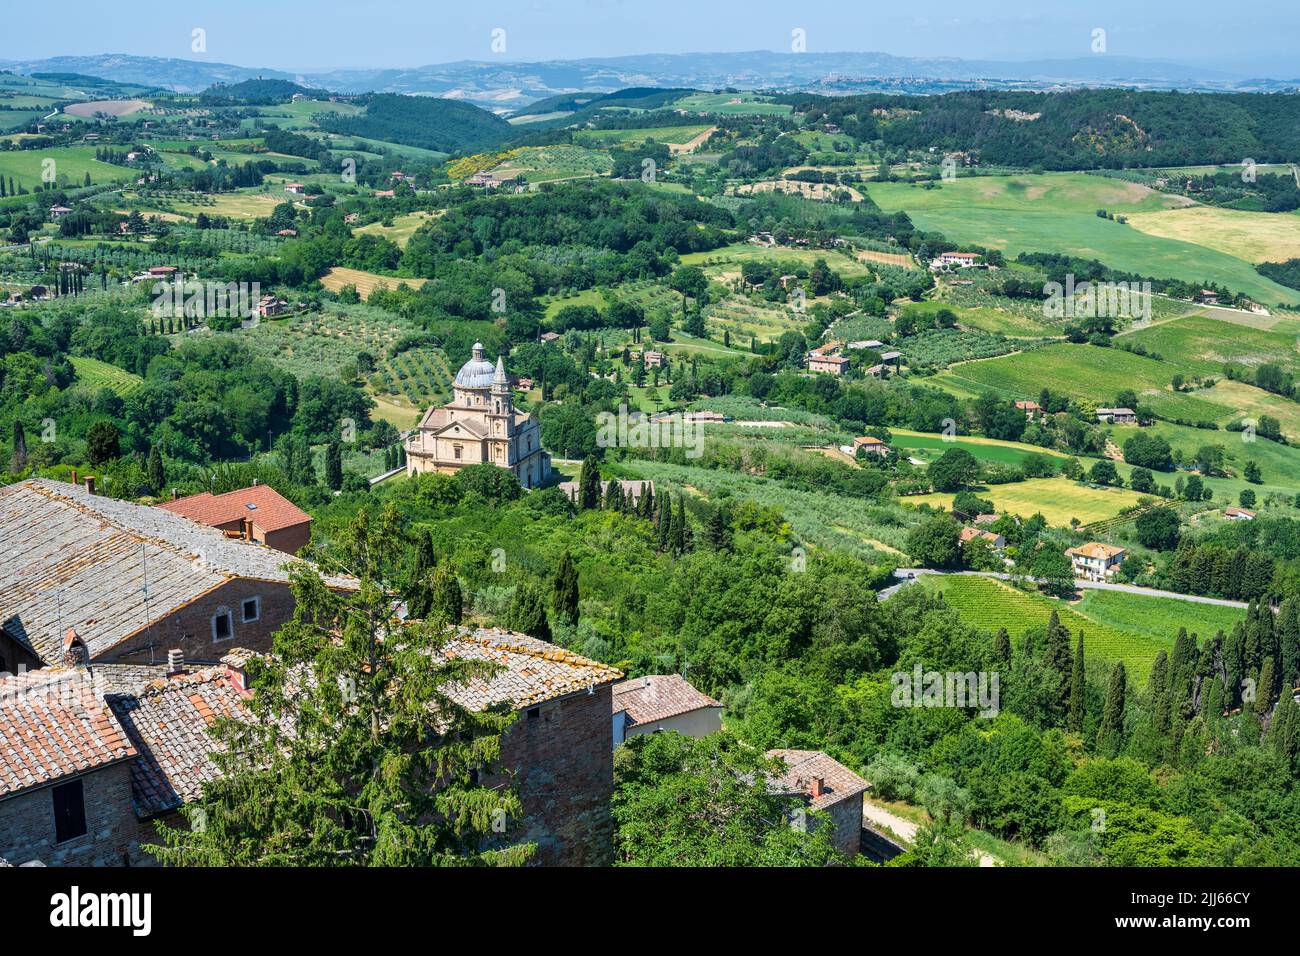 View of the Sanctuary of San Biagio (Tempio di San Biagio) with the rolling Tuscan countryside beyond, from Montepulciano in Tuscany, Italy Stock Photo